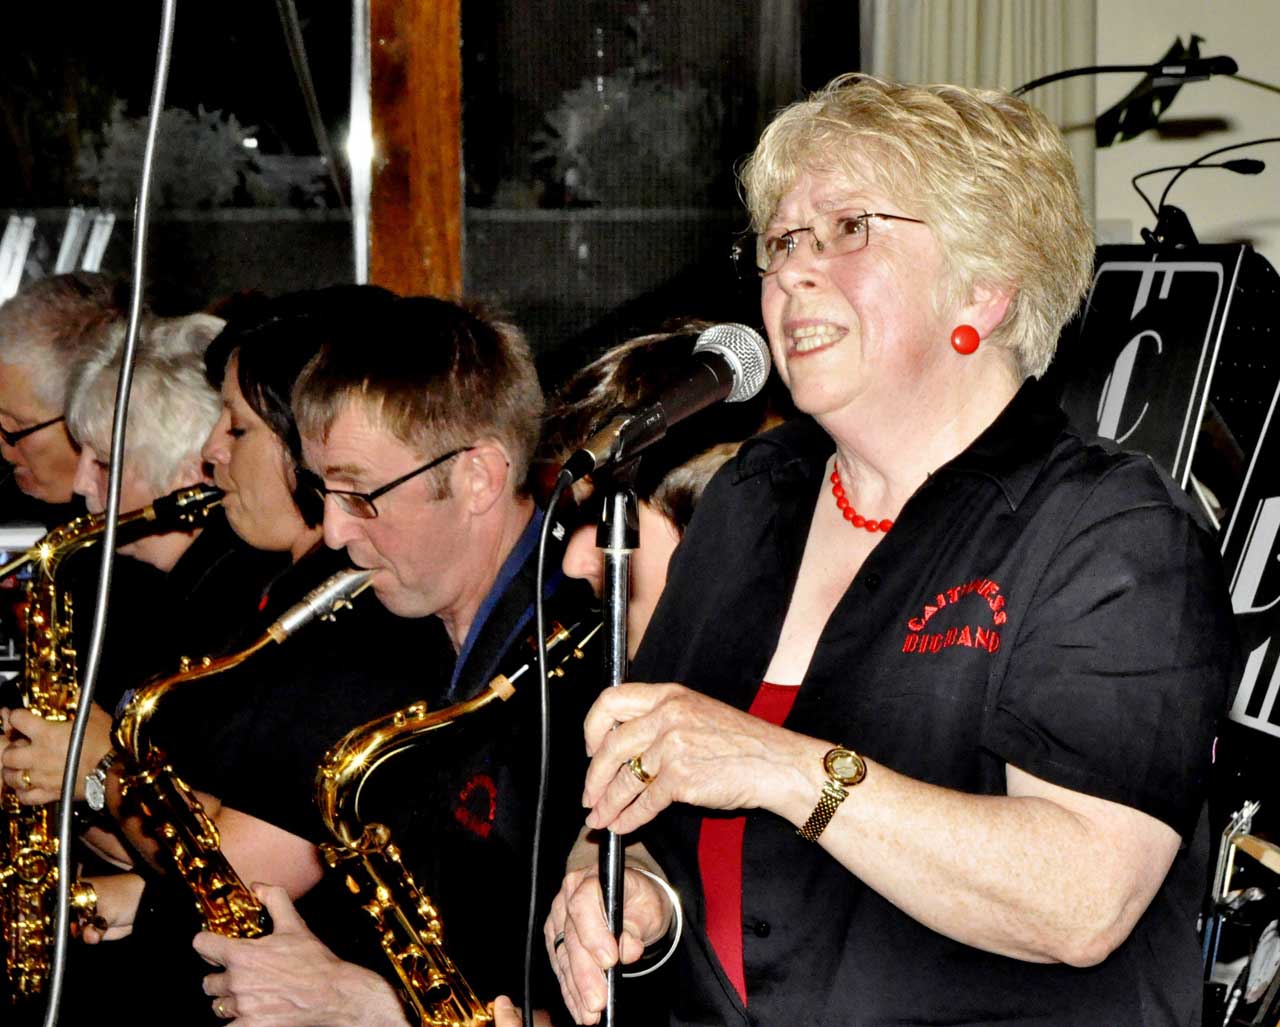 Photo: Big Band bash was Strictly for music lovers and dancers